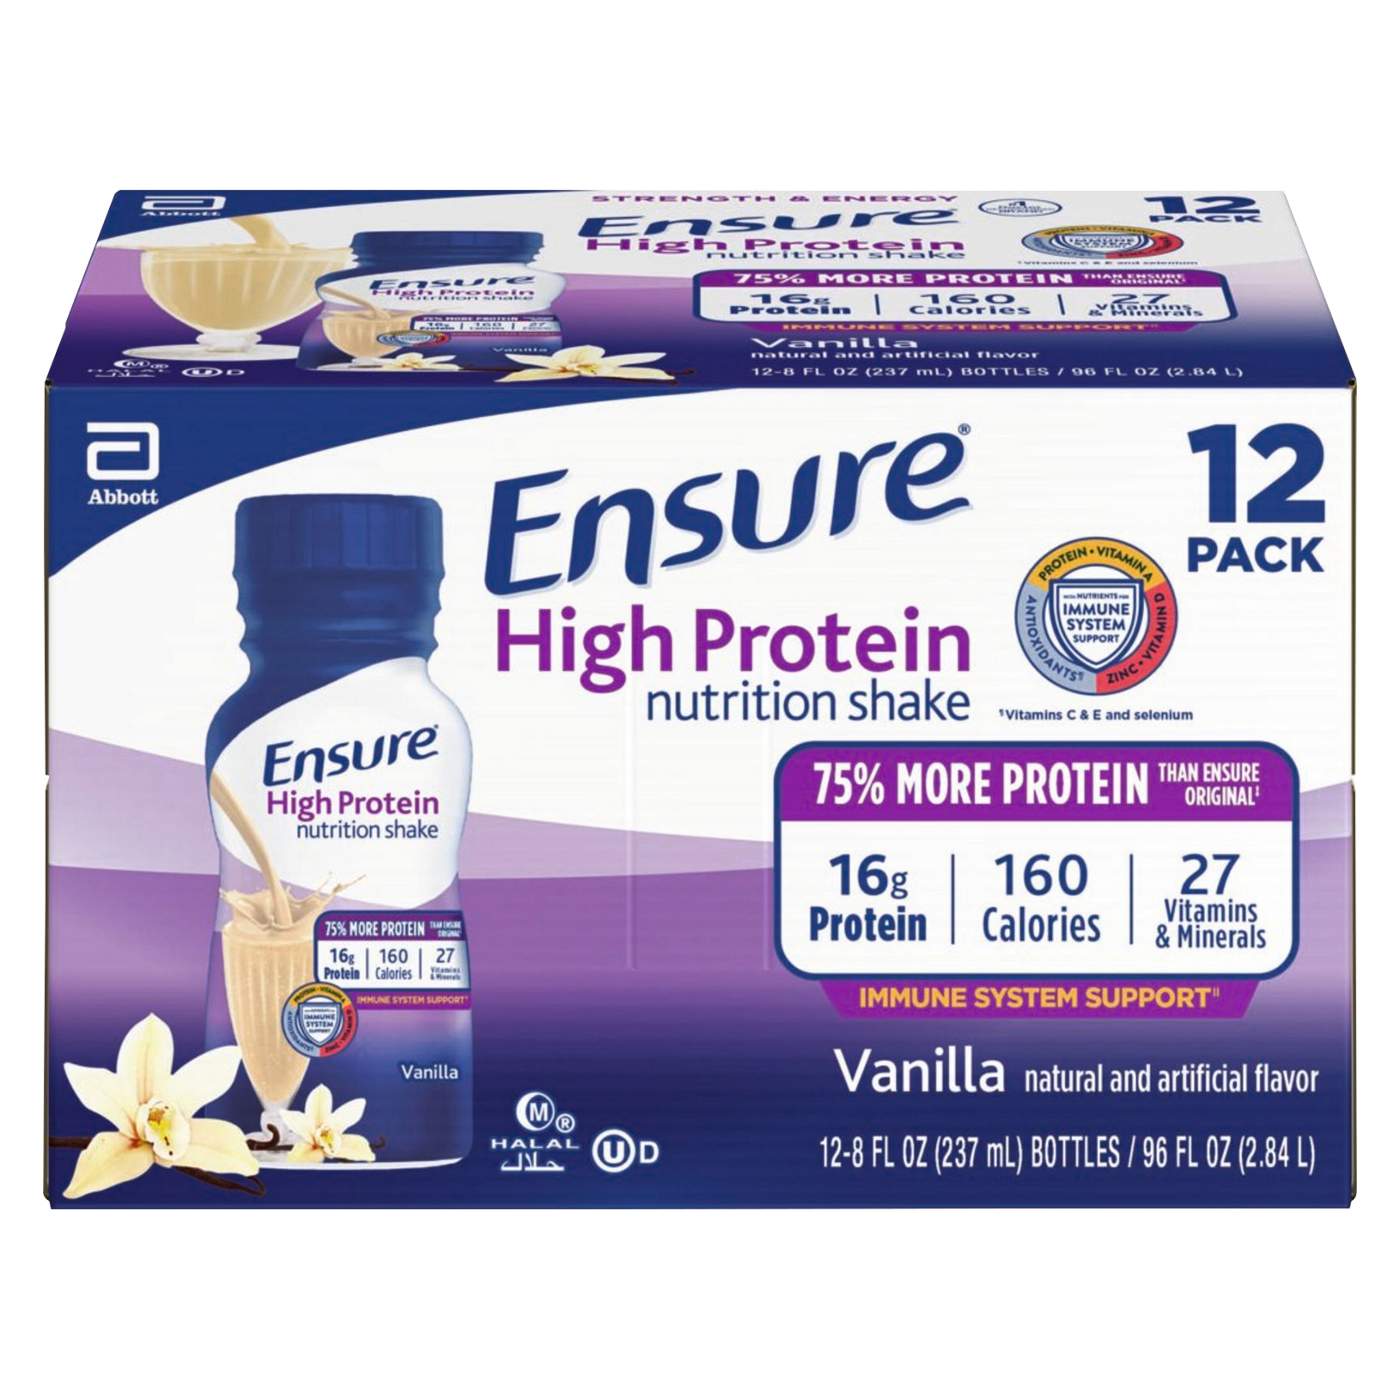 Ensure Ensure High Protein Nutritional Shake, 16g Protein, Meal Replacement Shake, Vanilla, 8 fl oz, 12 Ct; image 2 of 2